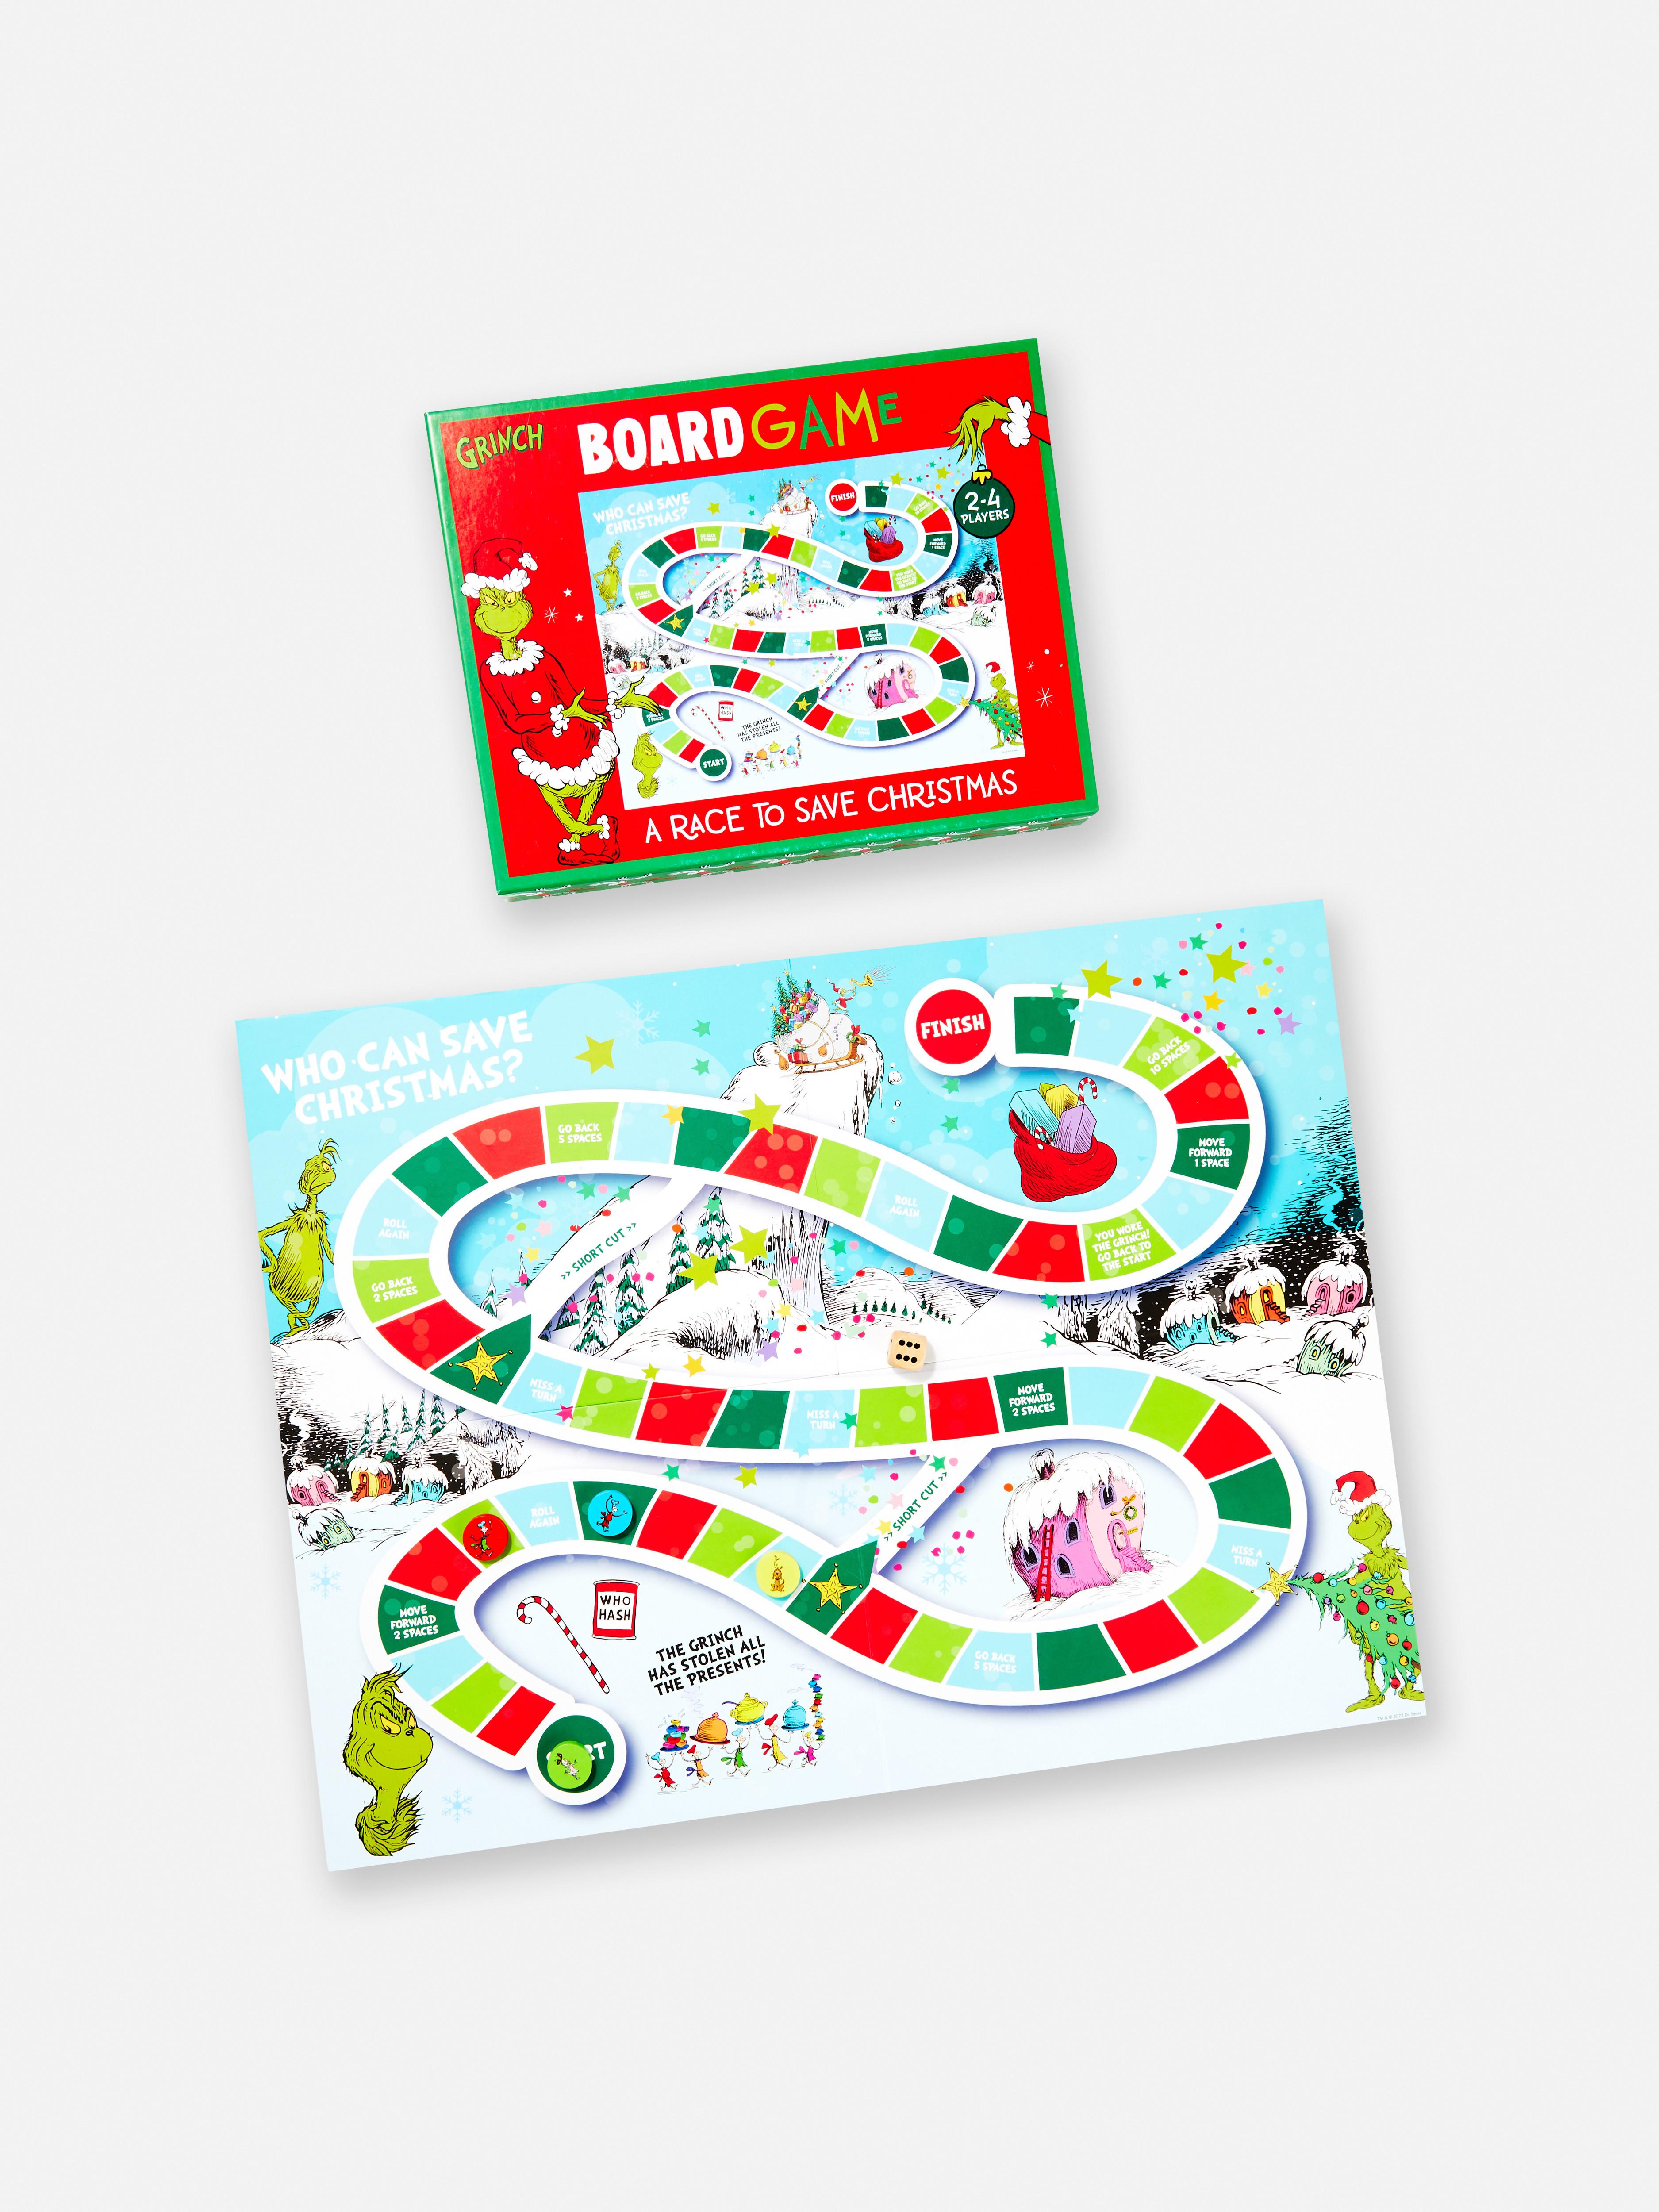 The Grinch Board Game